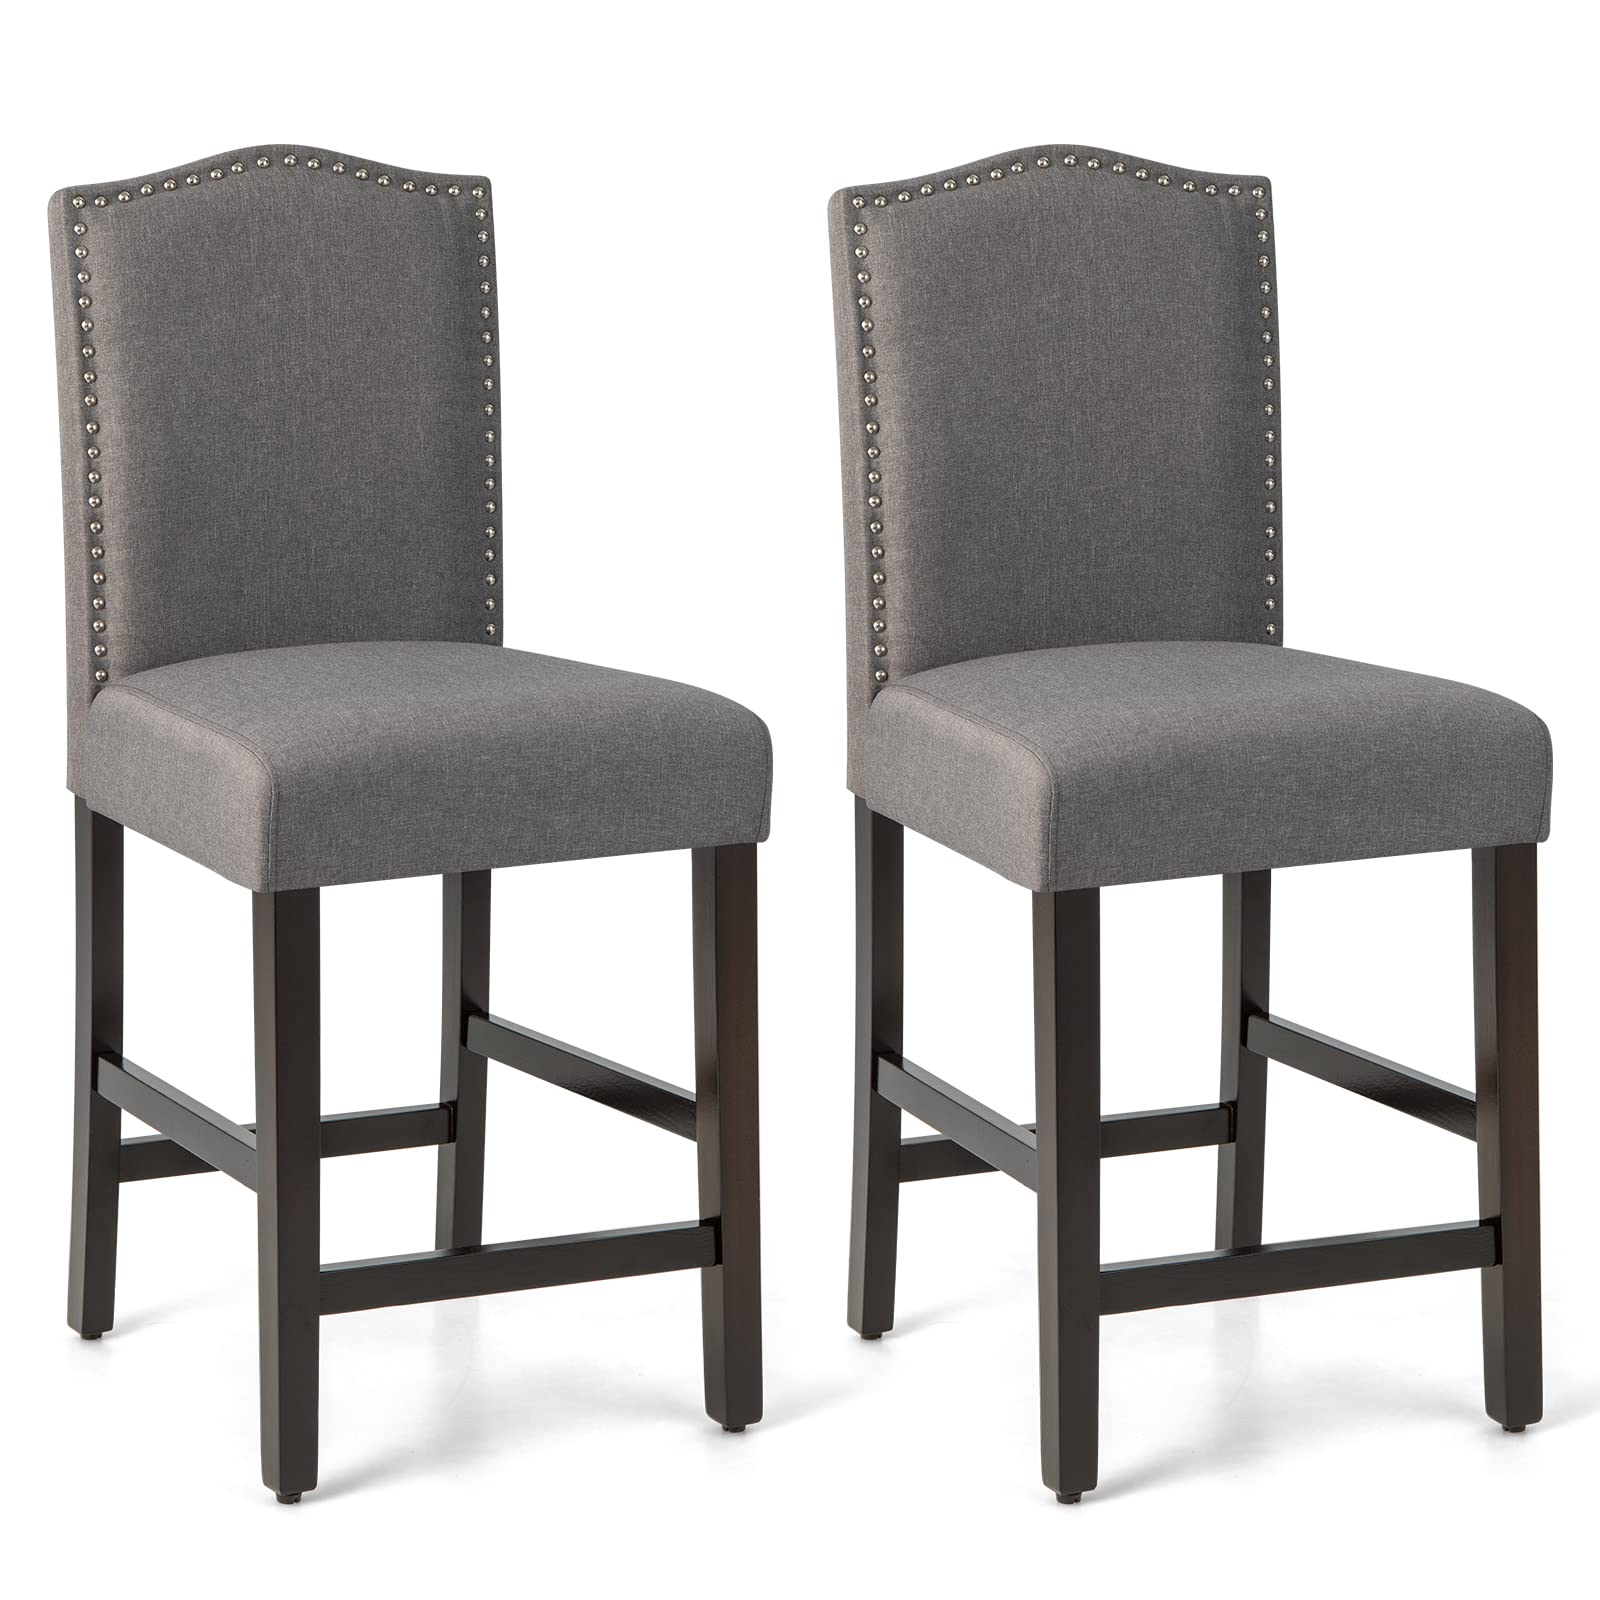 Giantex Bar Stools Set of 2, 25" Counter Height Bar Dining Chairs with Rubber Wood Legs